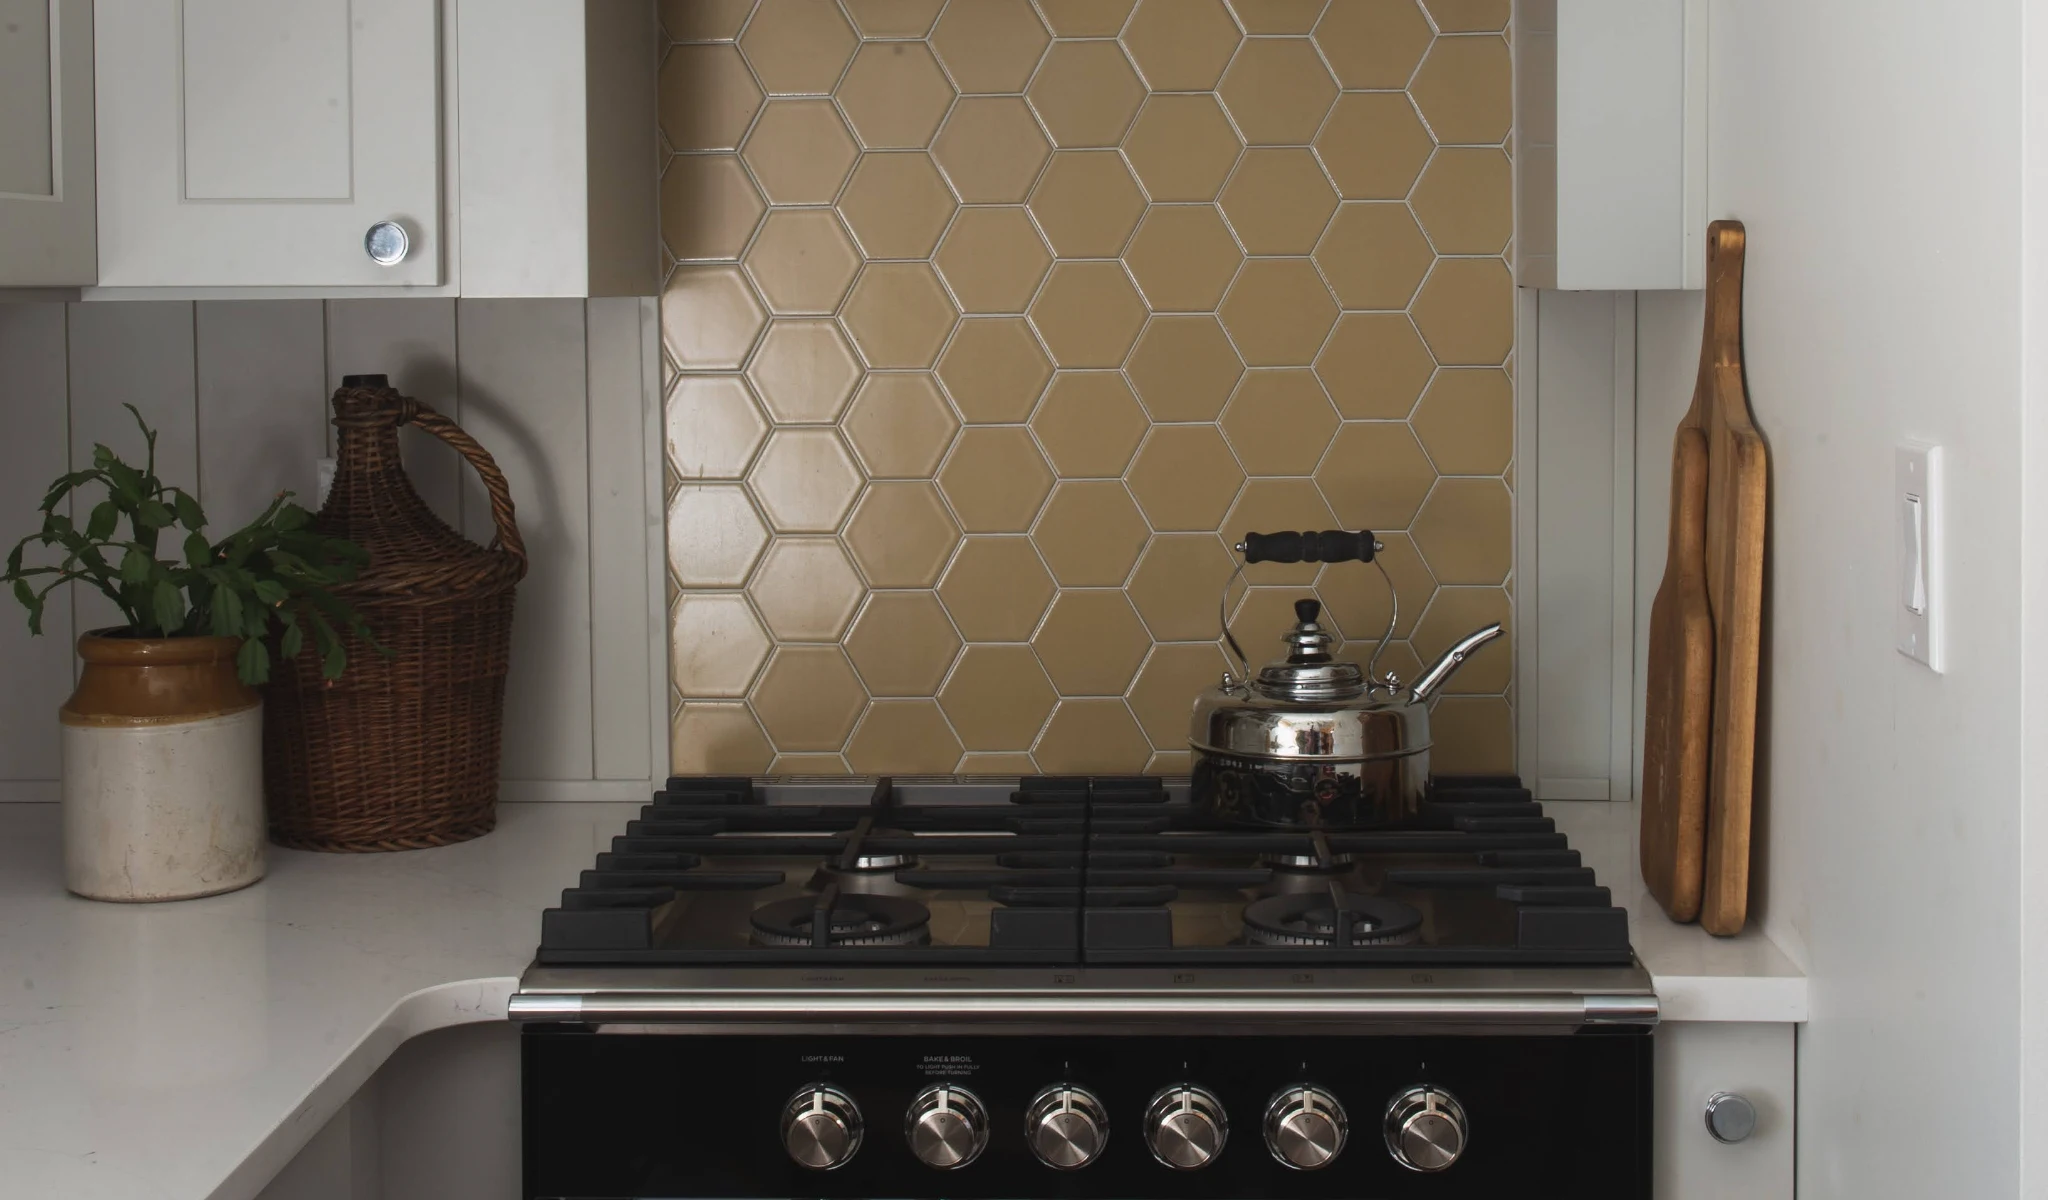 A kitchen with a stove and custom tiled backsplash.